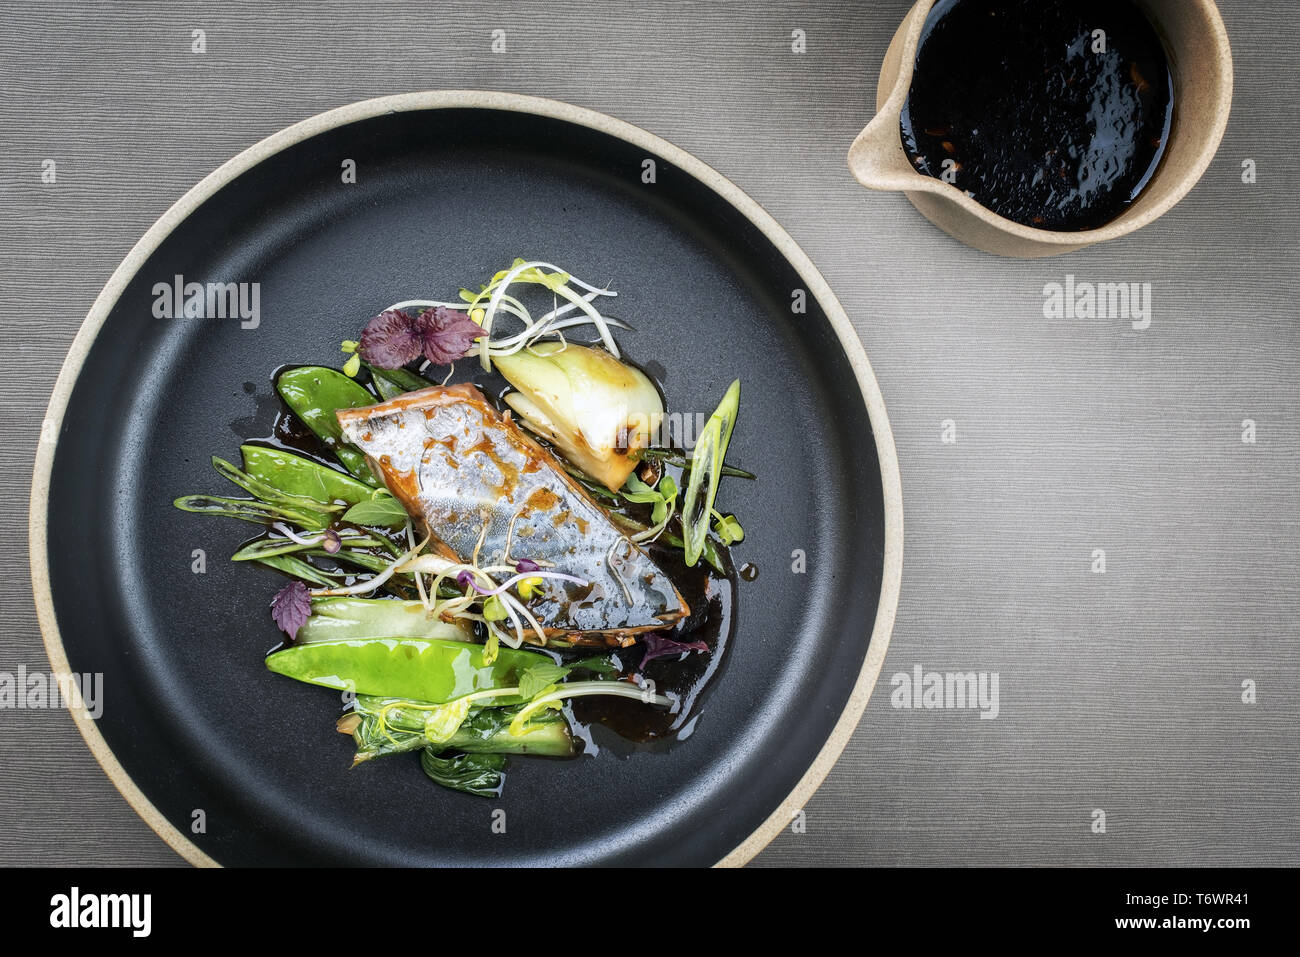 Modern style Japanese bonito tuna fish filet with vegetable glazed in teriyaki sauce as top view on a plate with copy space Stock Photo